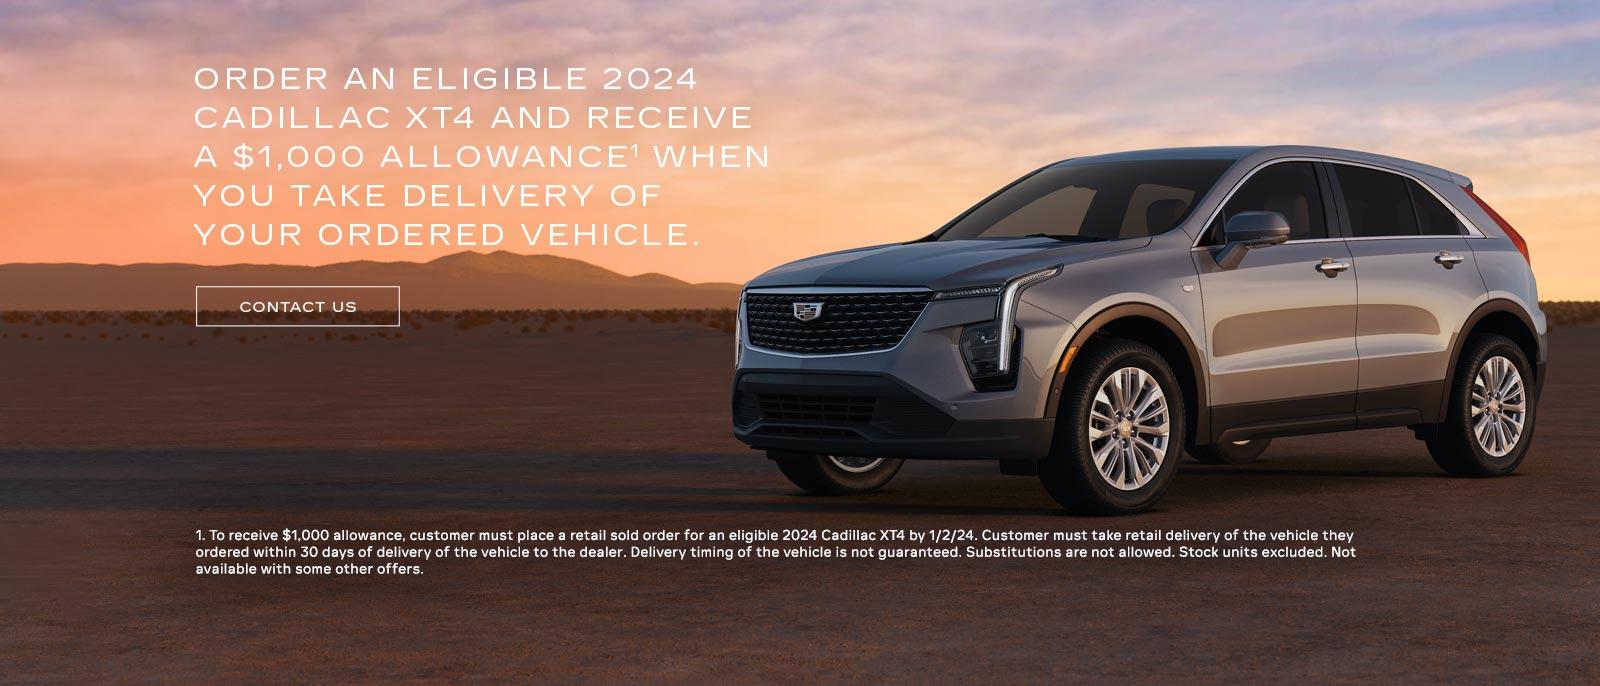 Order an eligible 2024 Cadillac XT4 and receive a $1,000 allowance when you take delivery of your ordered vehicle.